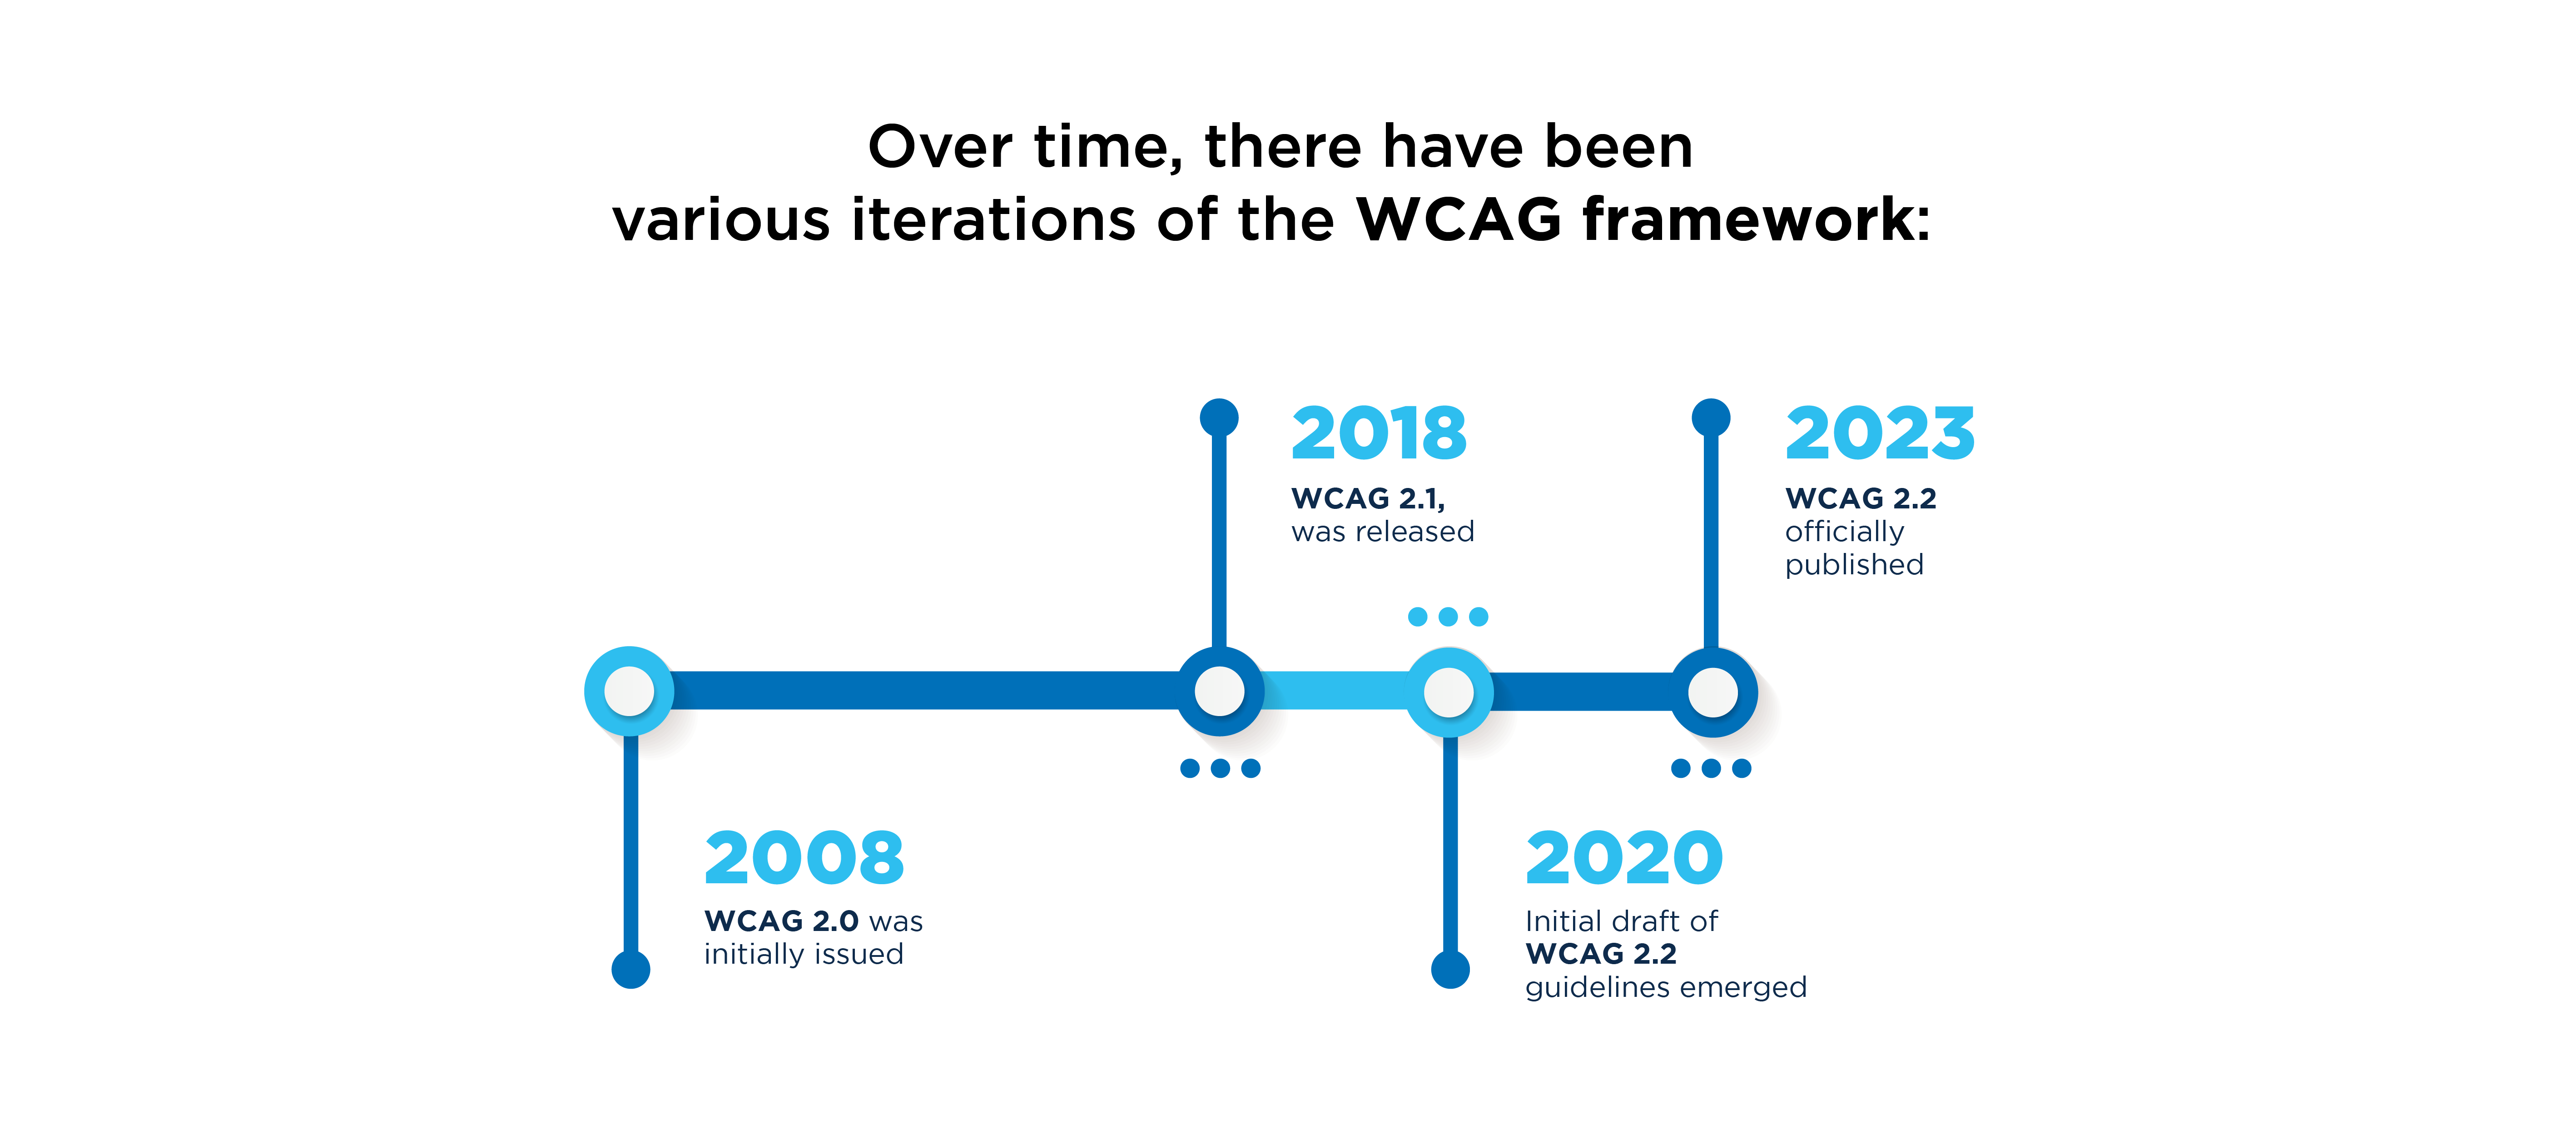 Over time, there have been various iterations of the WCAG framework:  WCAG 2.0 was initially issued in 2008.  The most recent version, WCAG 2.1, was released in 2018.  The initial draft of the forthcoming WCAG 2.2 guidelines emerged in February 2020 and was officially published on October 5th, 2023.